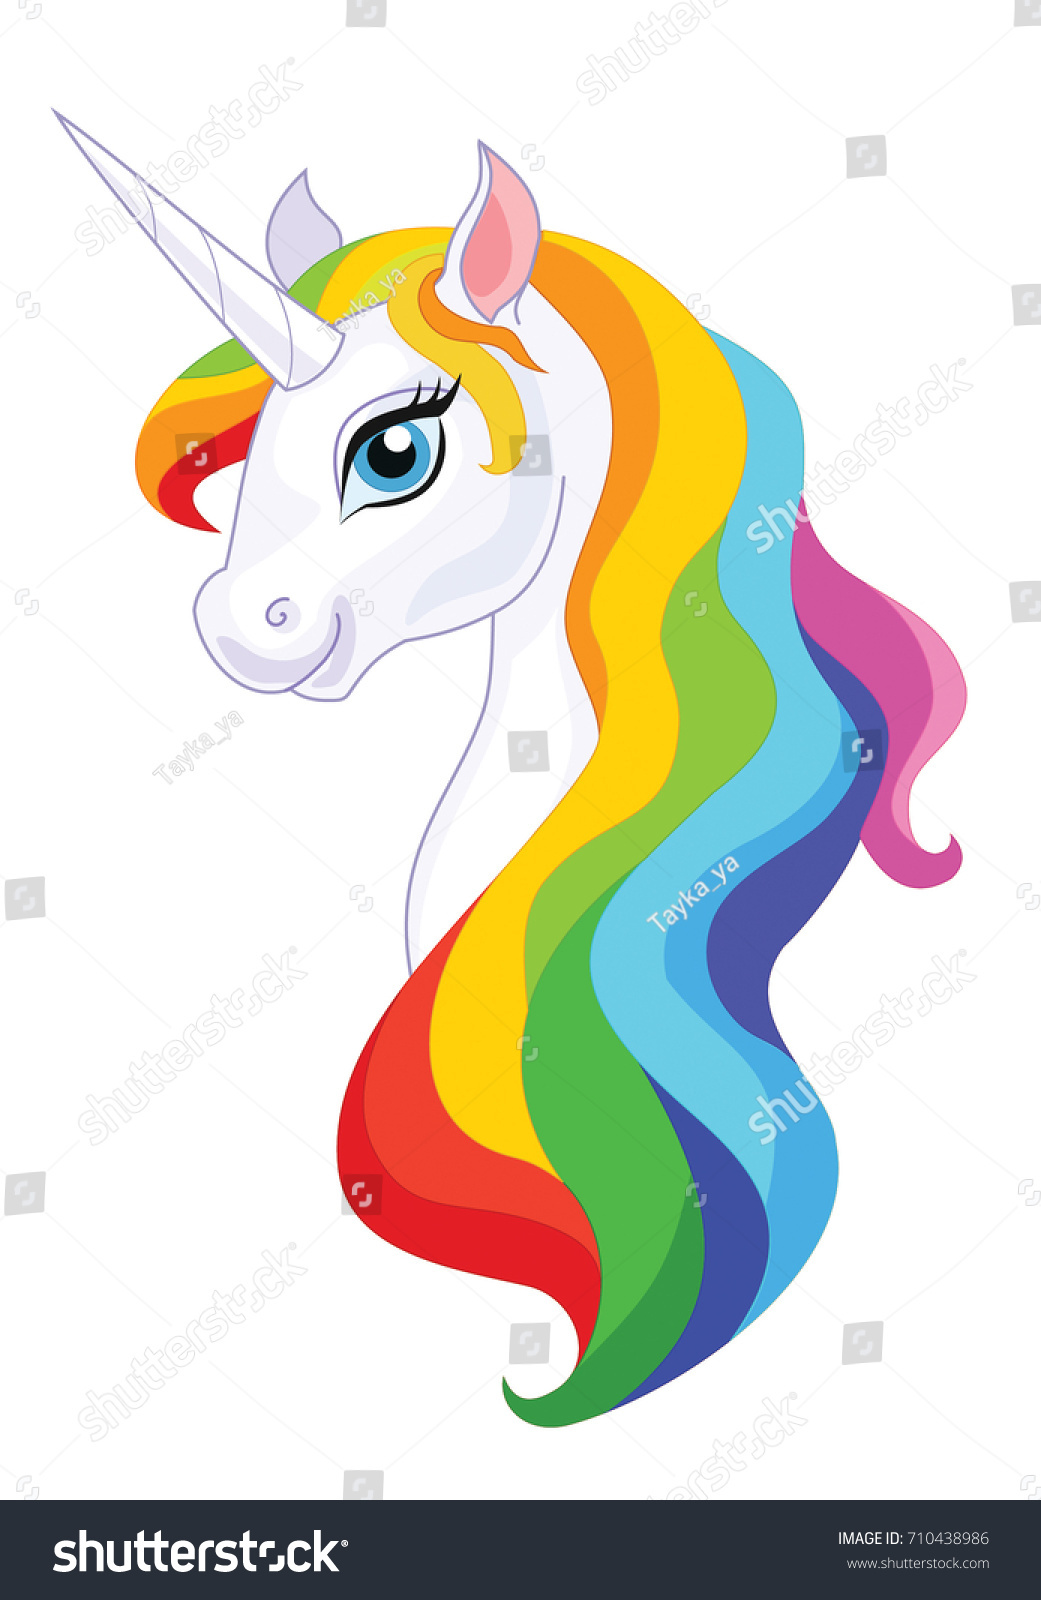 Unicorn Head Isolated On White Background Stock Vector (Royalty Free ...